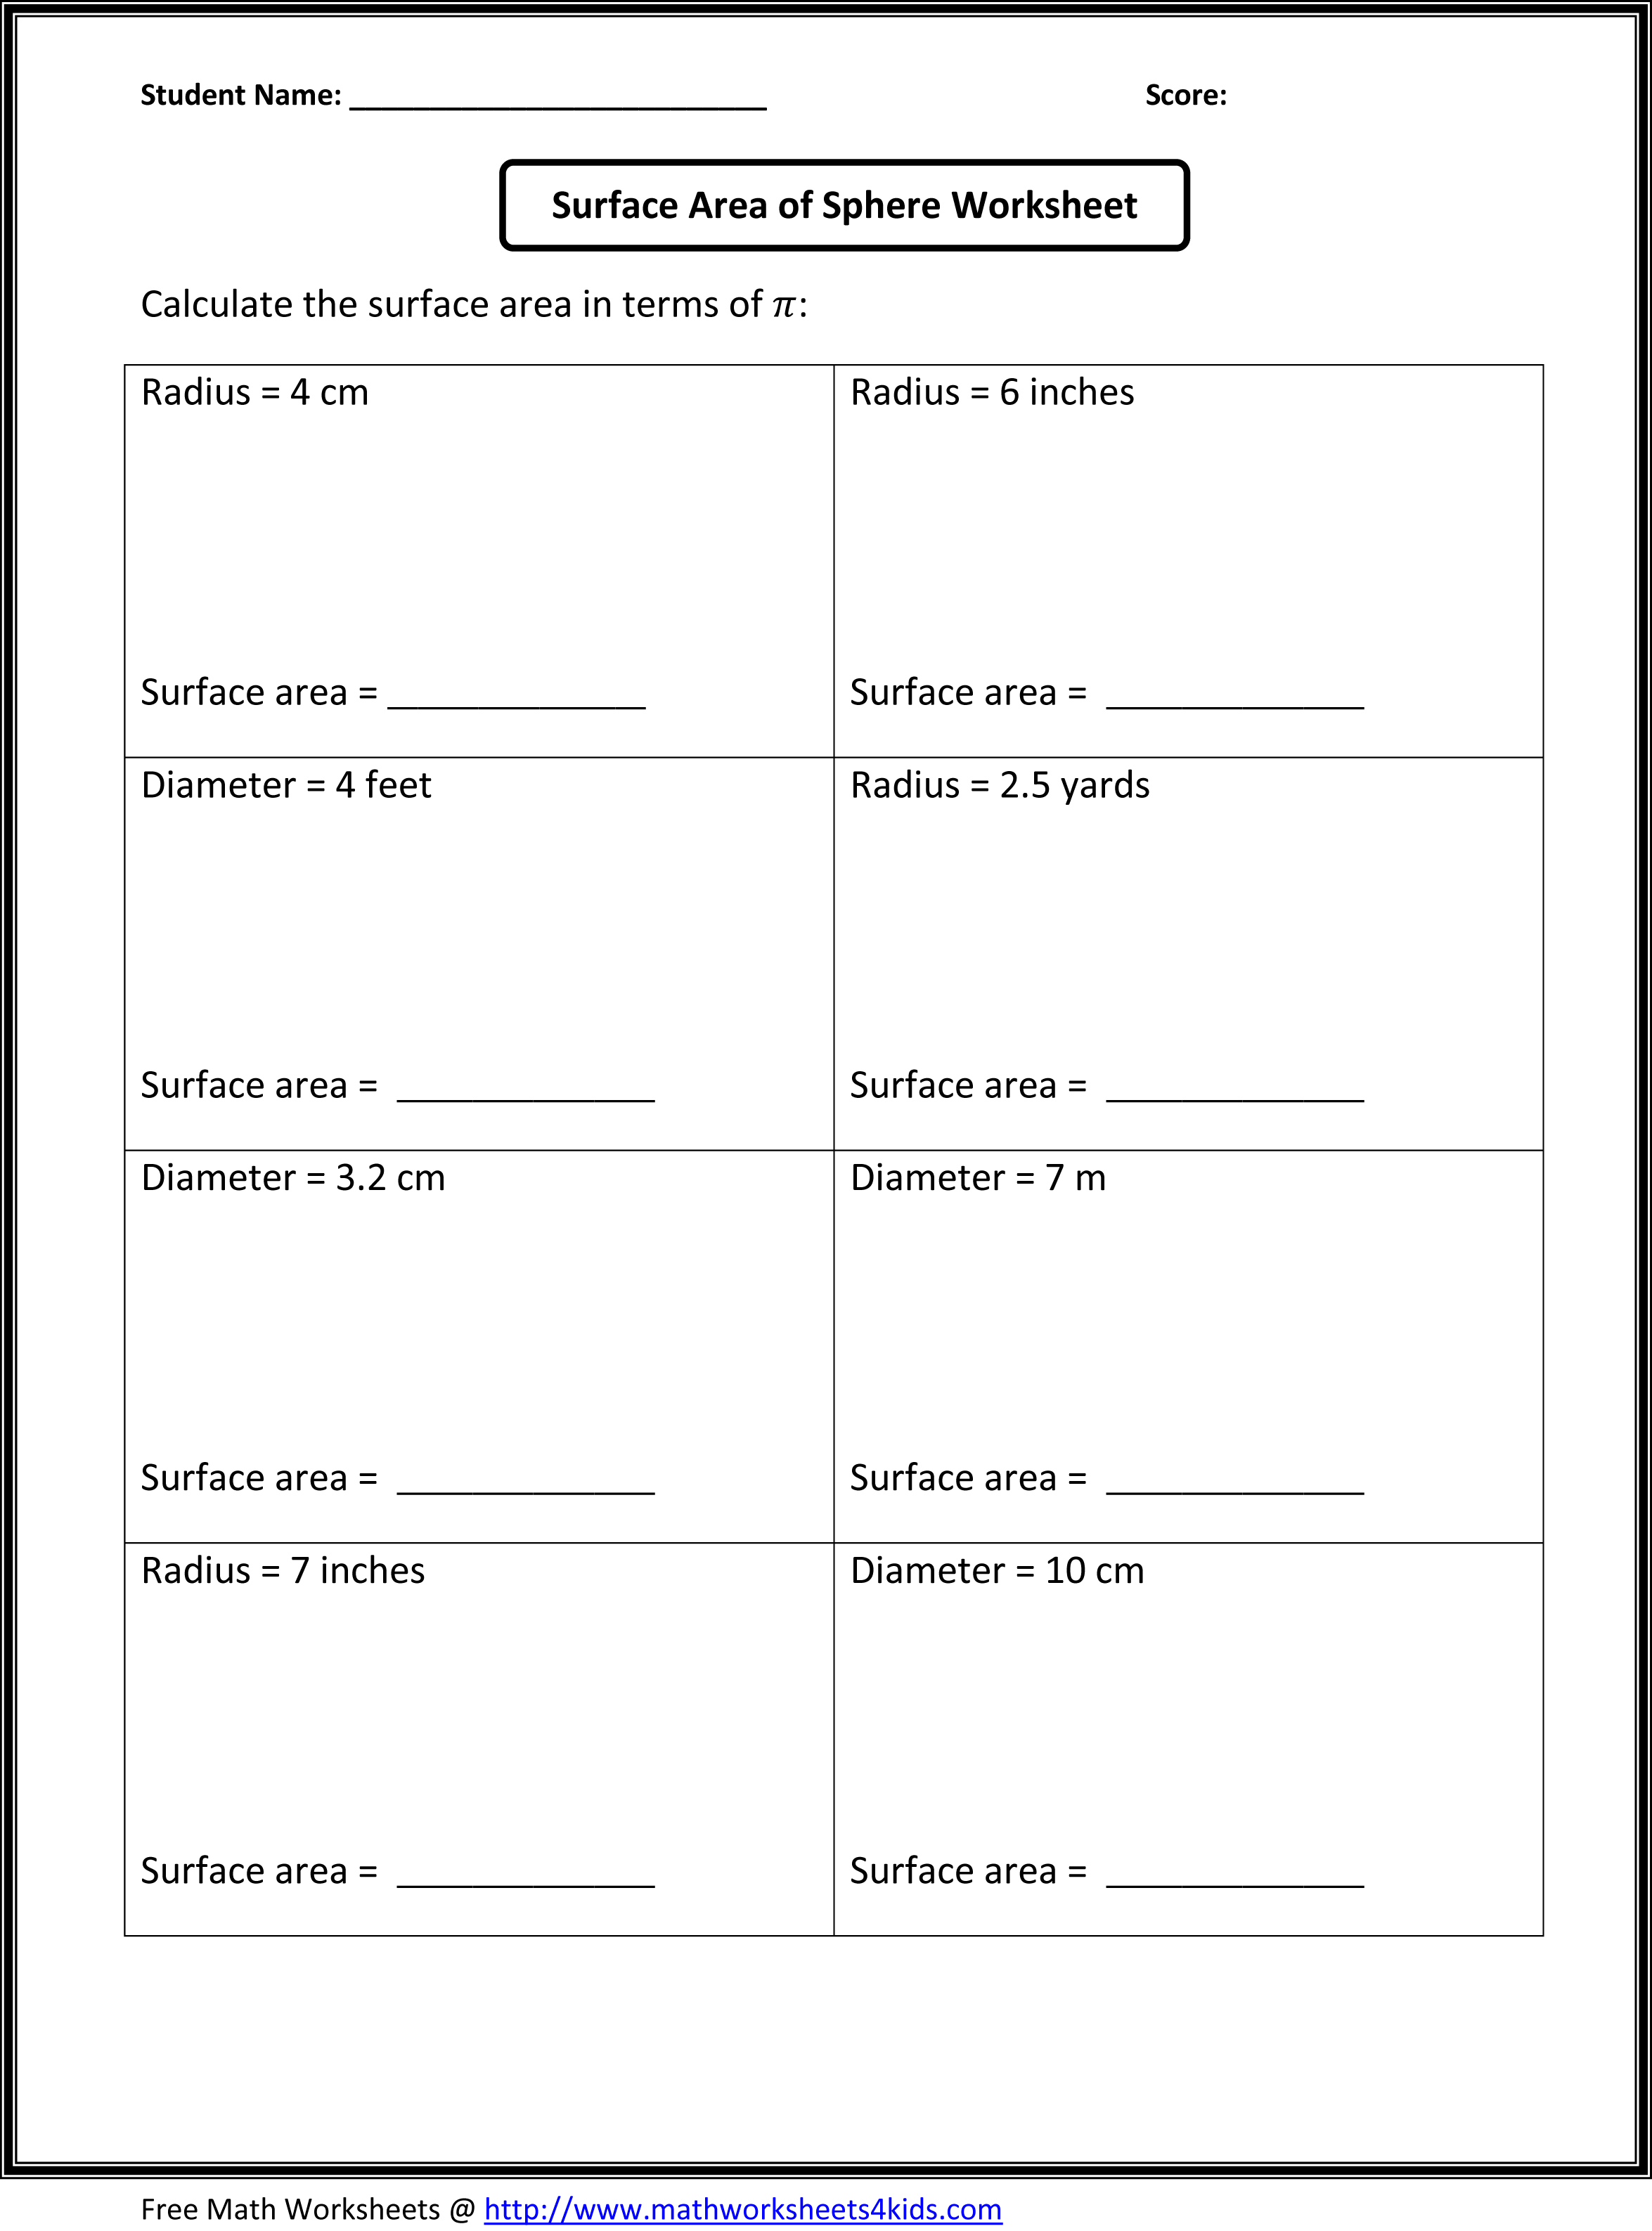 18-best-images-of-8th-grade-test-prep-worksheets-8th-grade-math-worksheets-printable-free-8th